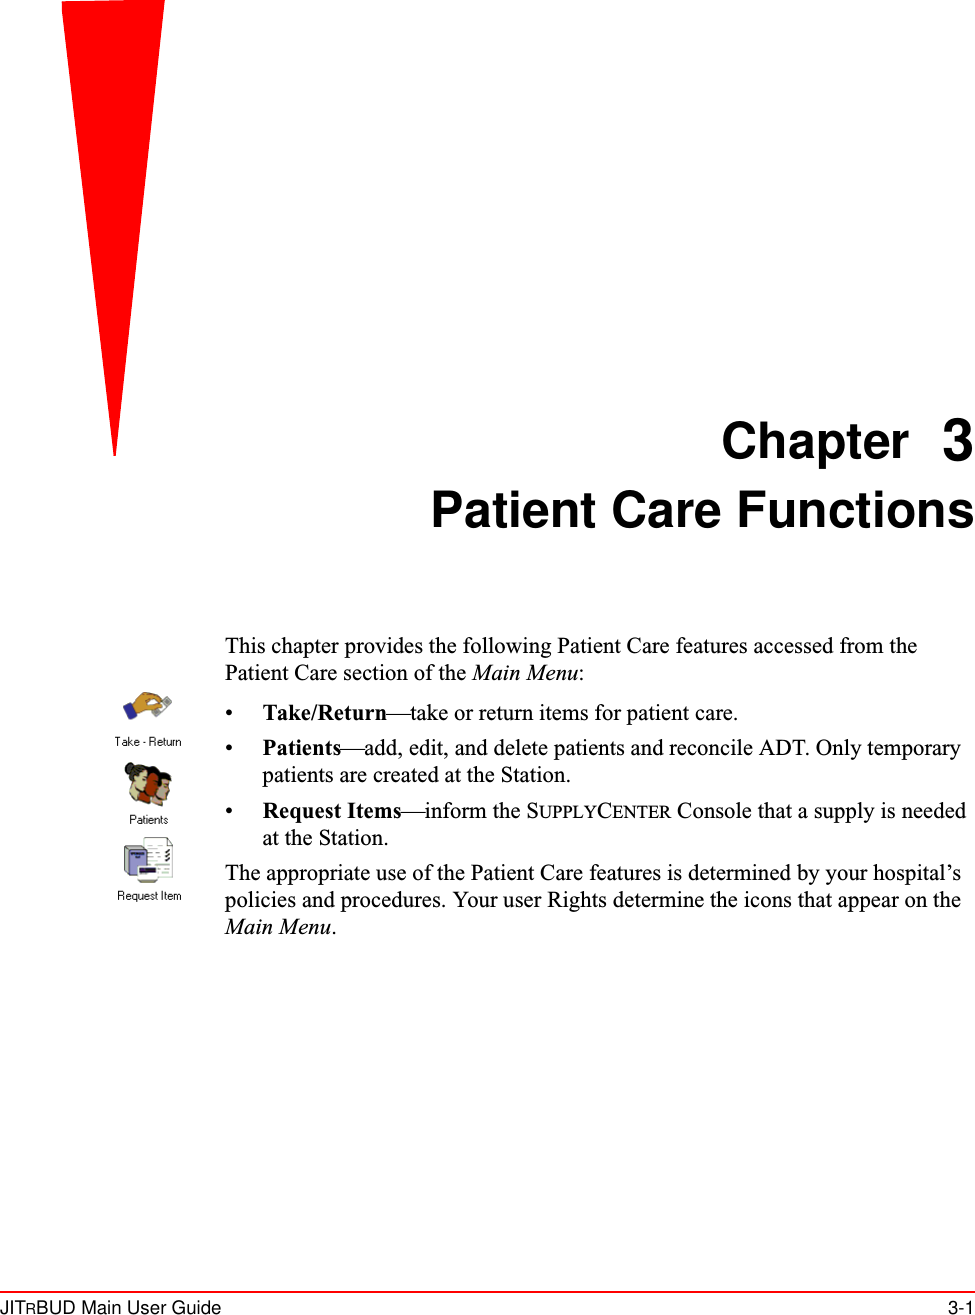 JITRBUD Main User Guide 3-1Chapter 3Patient Care FunctionsThis chapter provides the following Patient Care features accessed from the Patient Care section of the Main Menu:•Take/Return—take or return items for patient care.•Patients—add, edit, and delete patients and reconcile ADT. Only temporary patients are created at the Station.•Request Items—inform the SUPPLYCENTER Console that a supply is needed at the Station. The appropriate use of the Patient Care features is determined by your hospital’s policies and procedures. Your user Rights determine the icons that appear on the Main Menu.